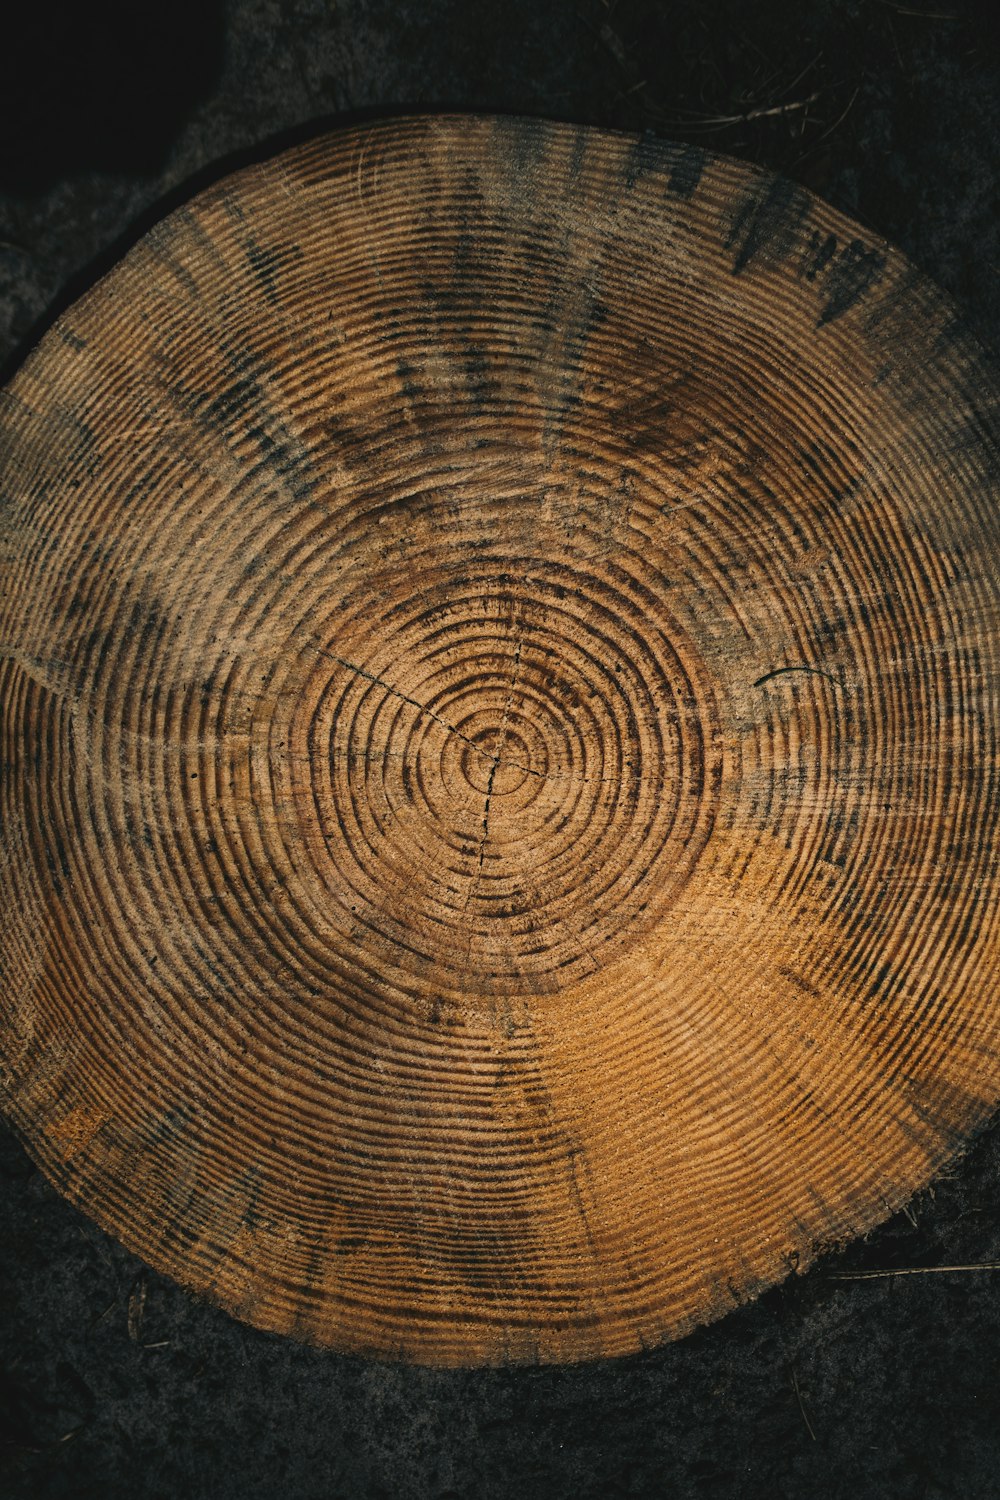 a close up of a tree stump with rings